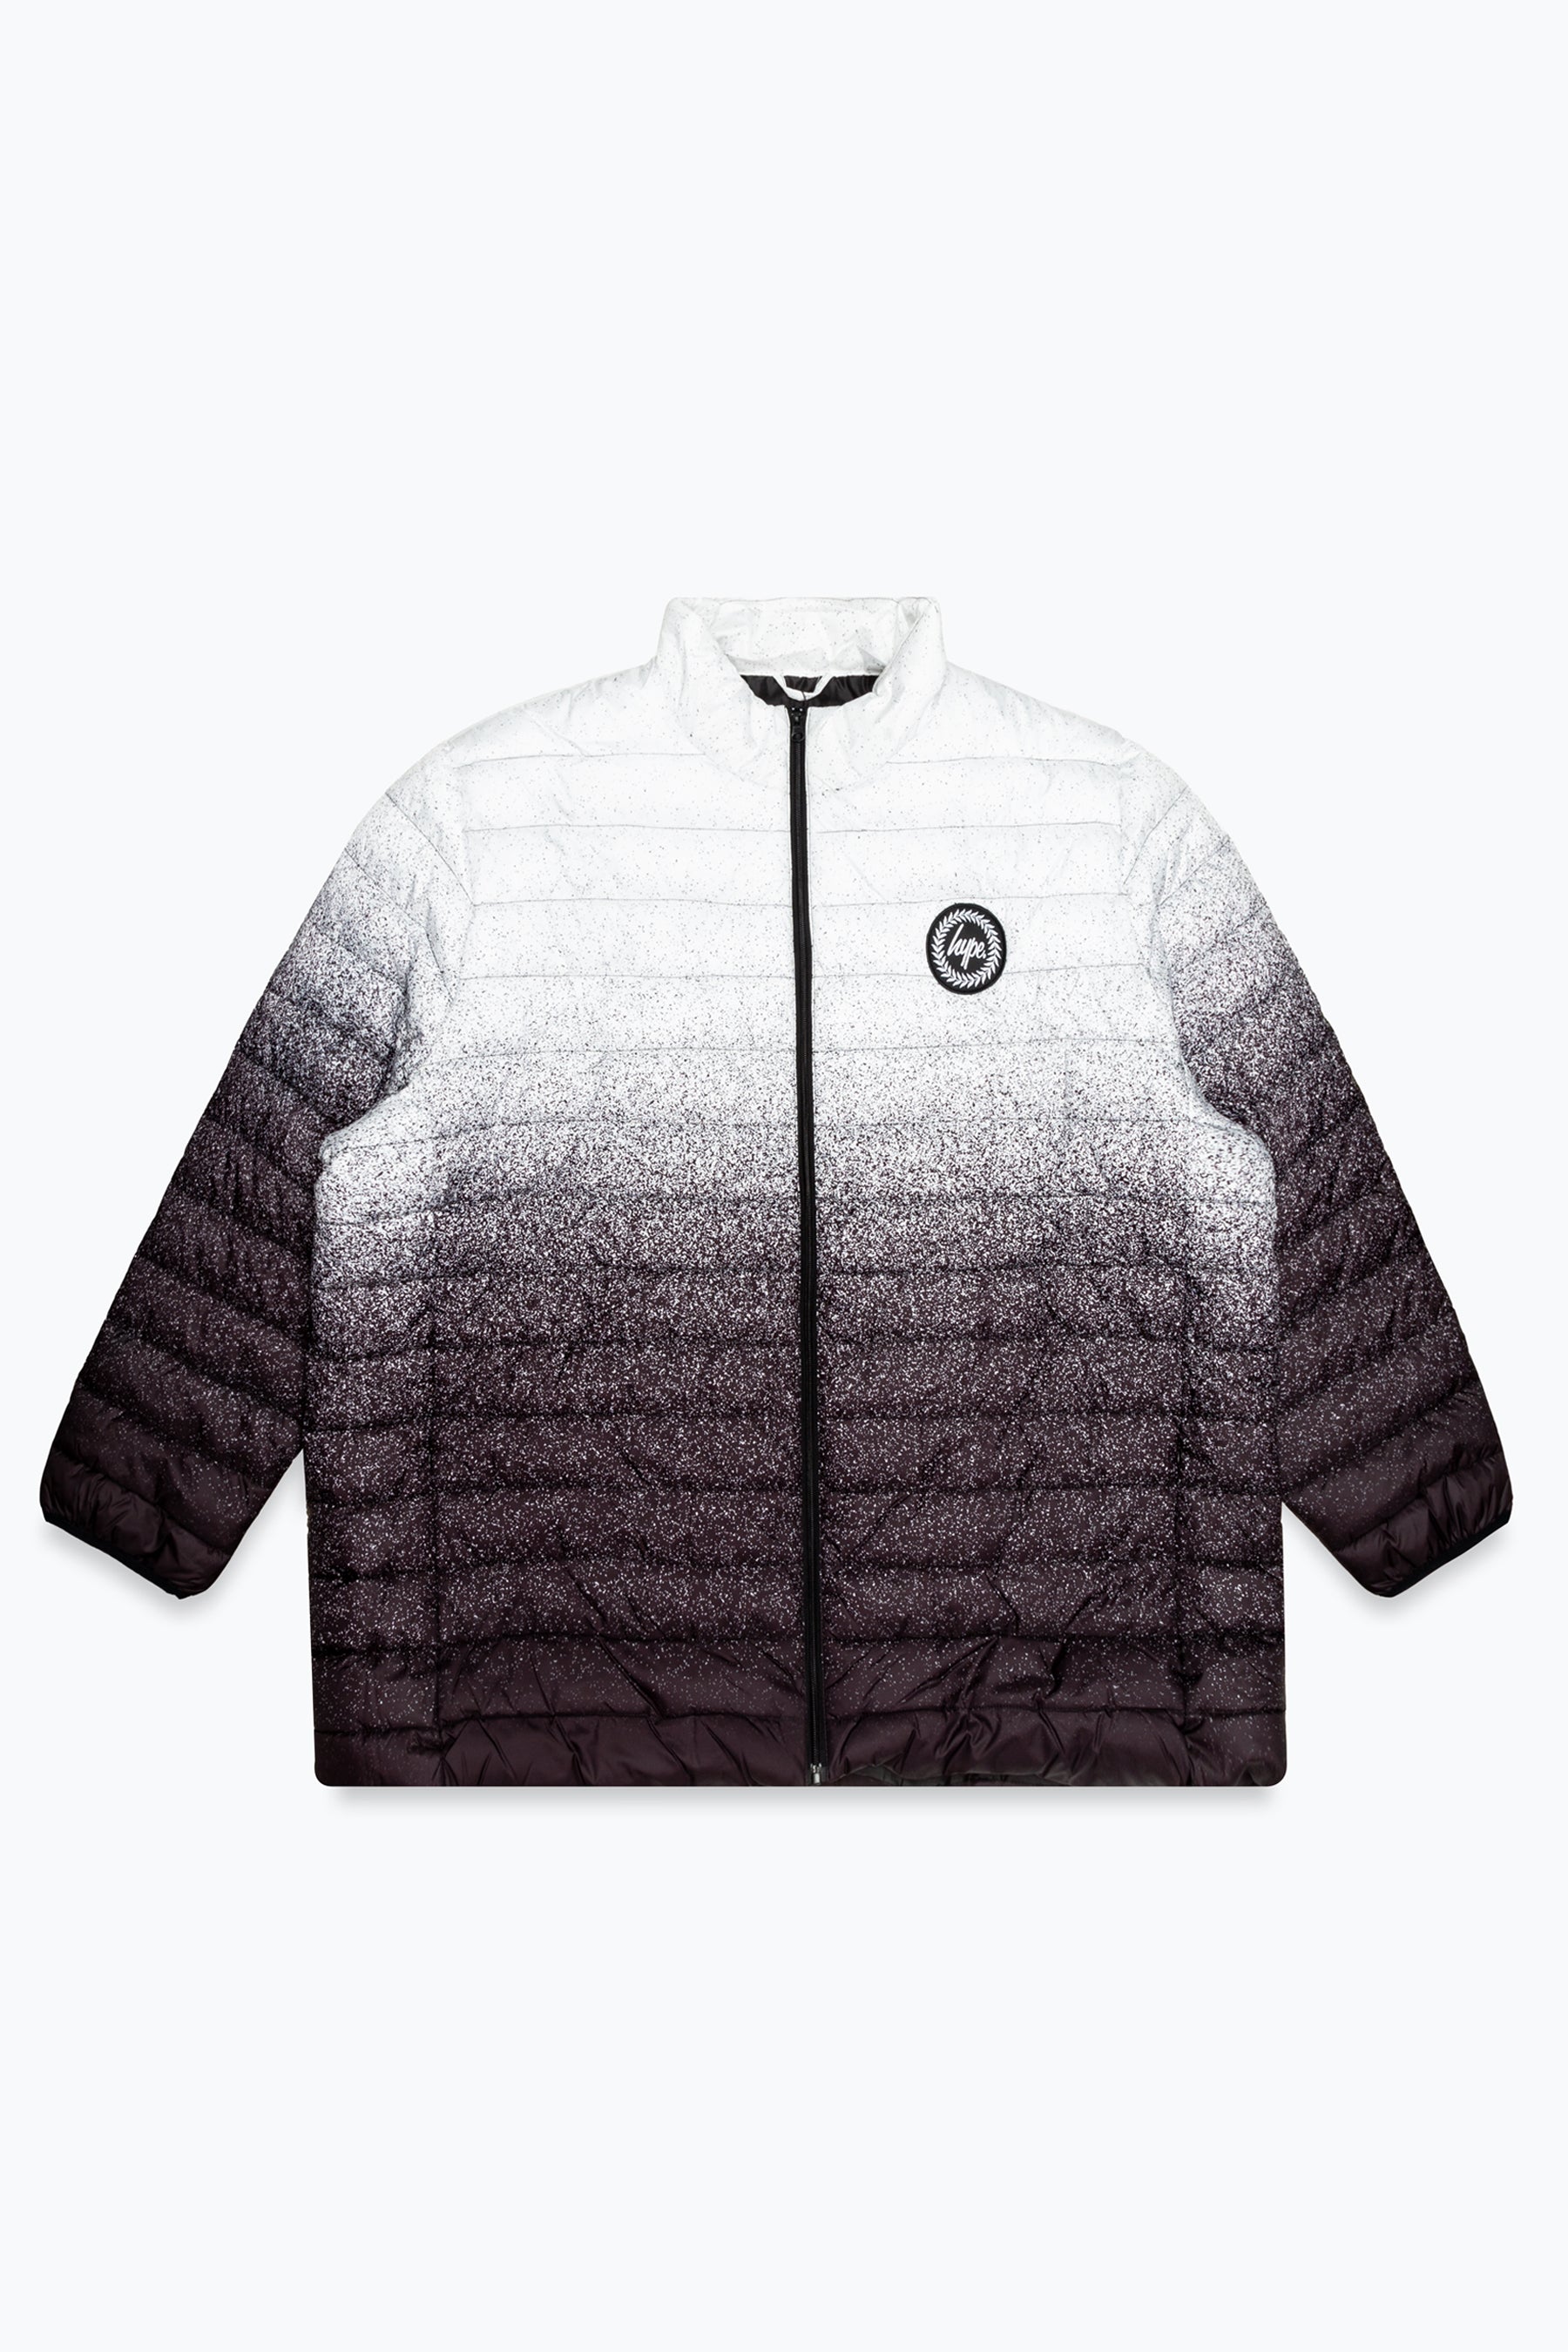 hype speckle fade mens puffer jacket